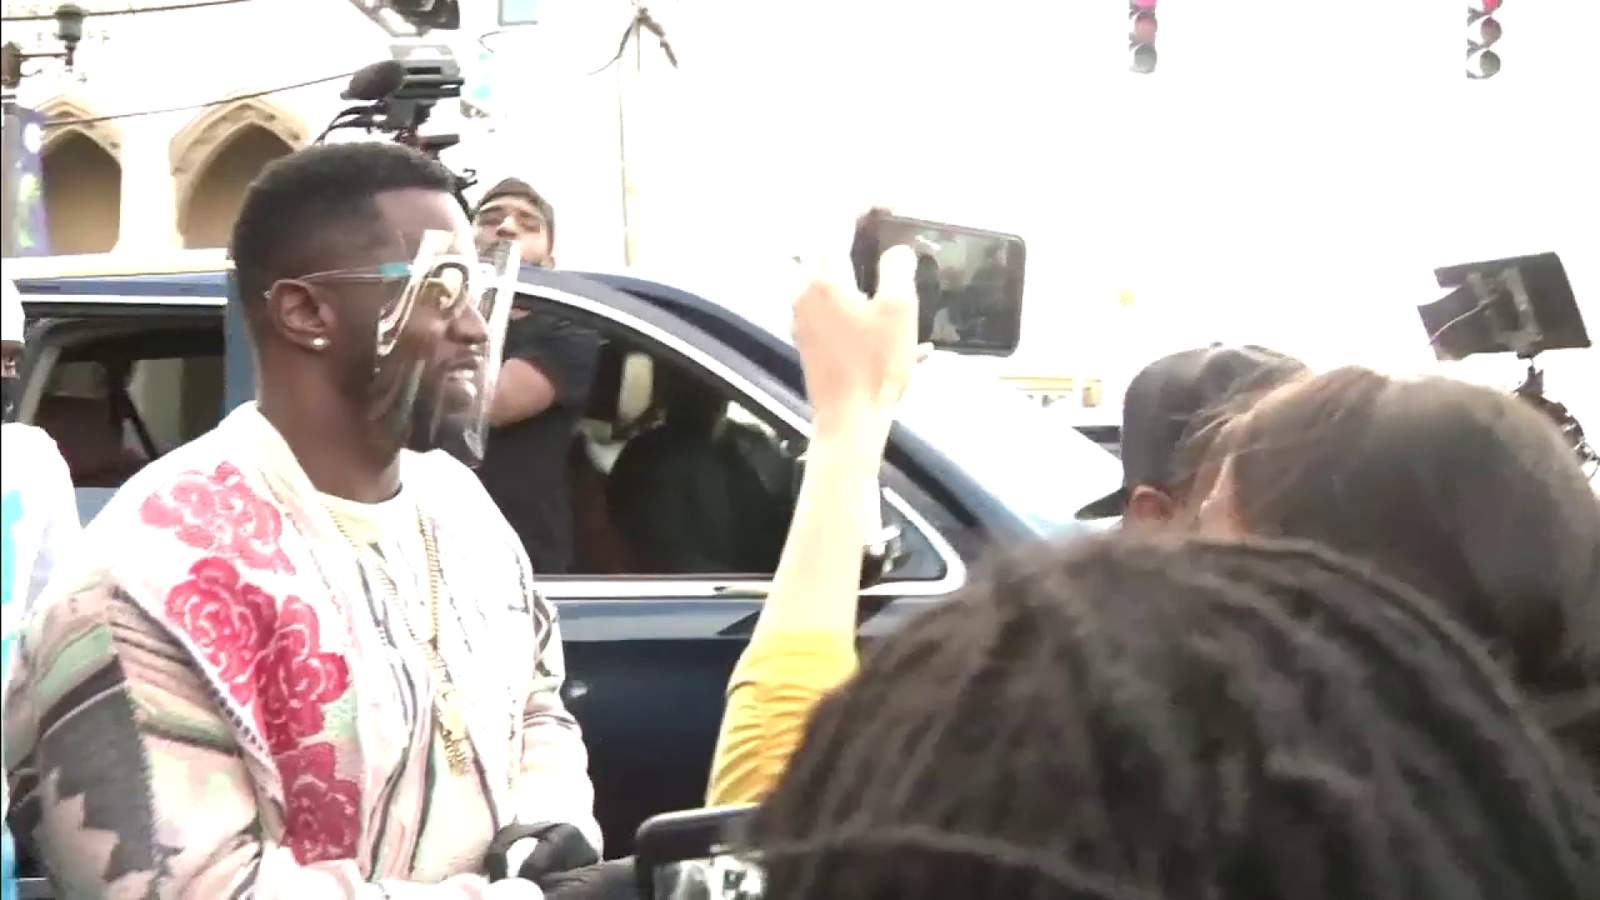 Sean ‘Diddy’ Combs helps distribute gift bags to Overtown residents in need